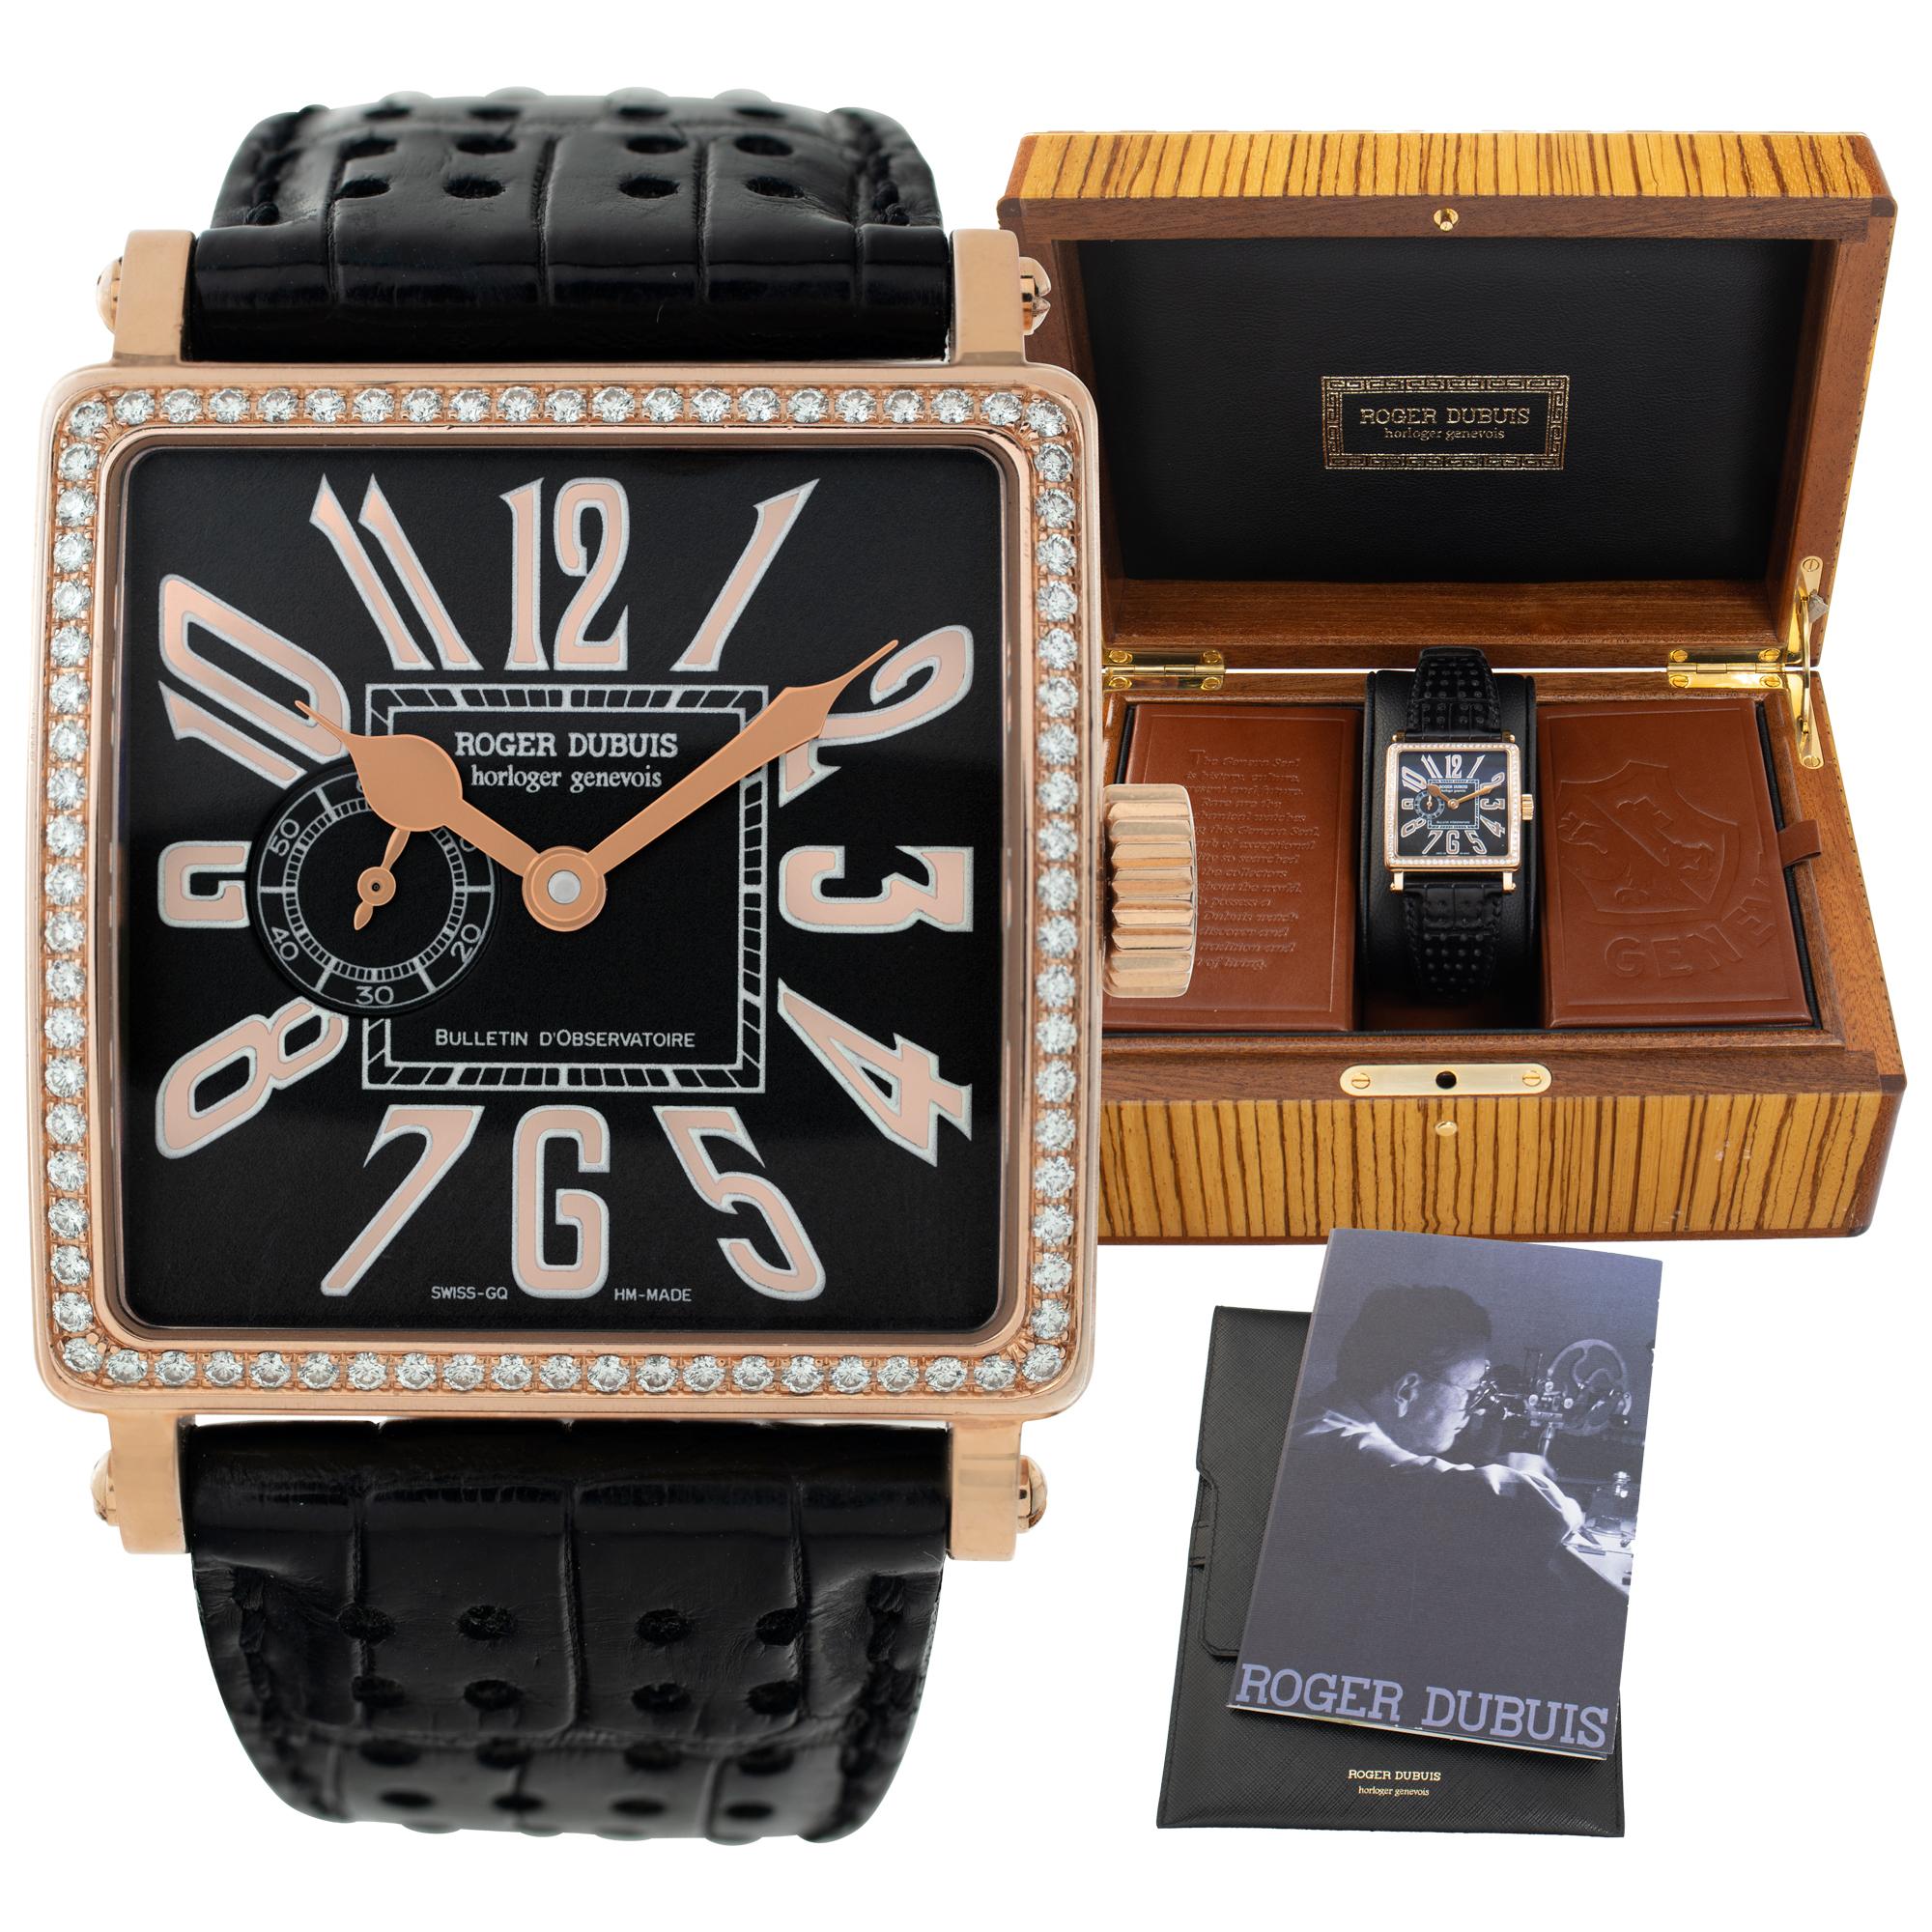 Roger Dubuis Golden Square 18k rose gold Manual Wristwatch Ref G34 98 5-SD For Sale 3